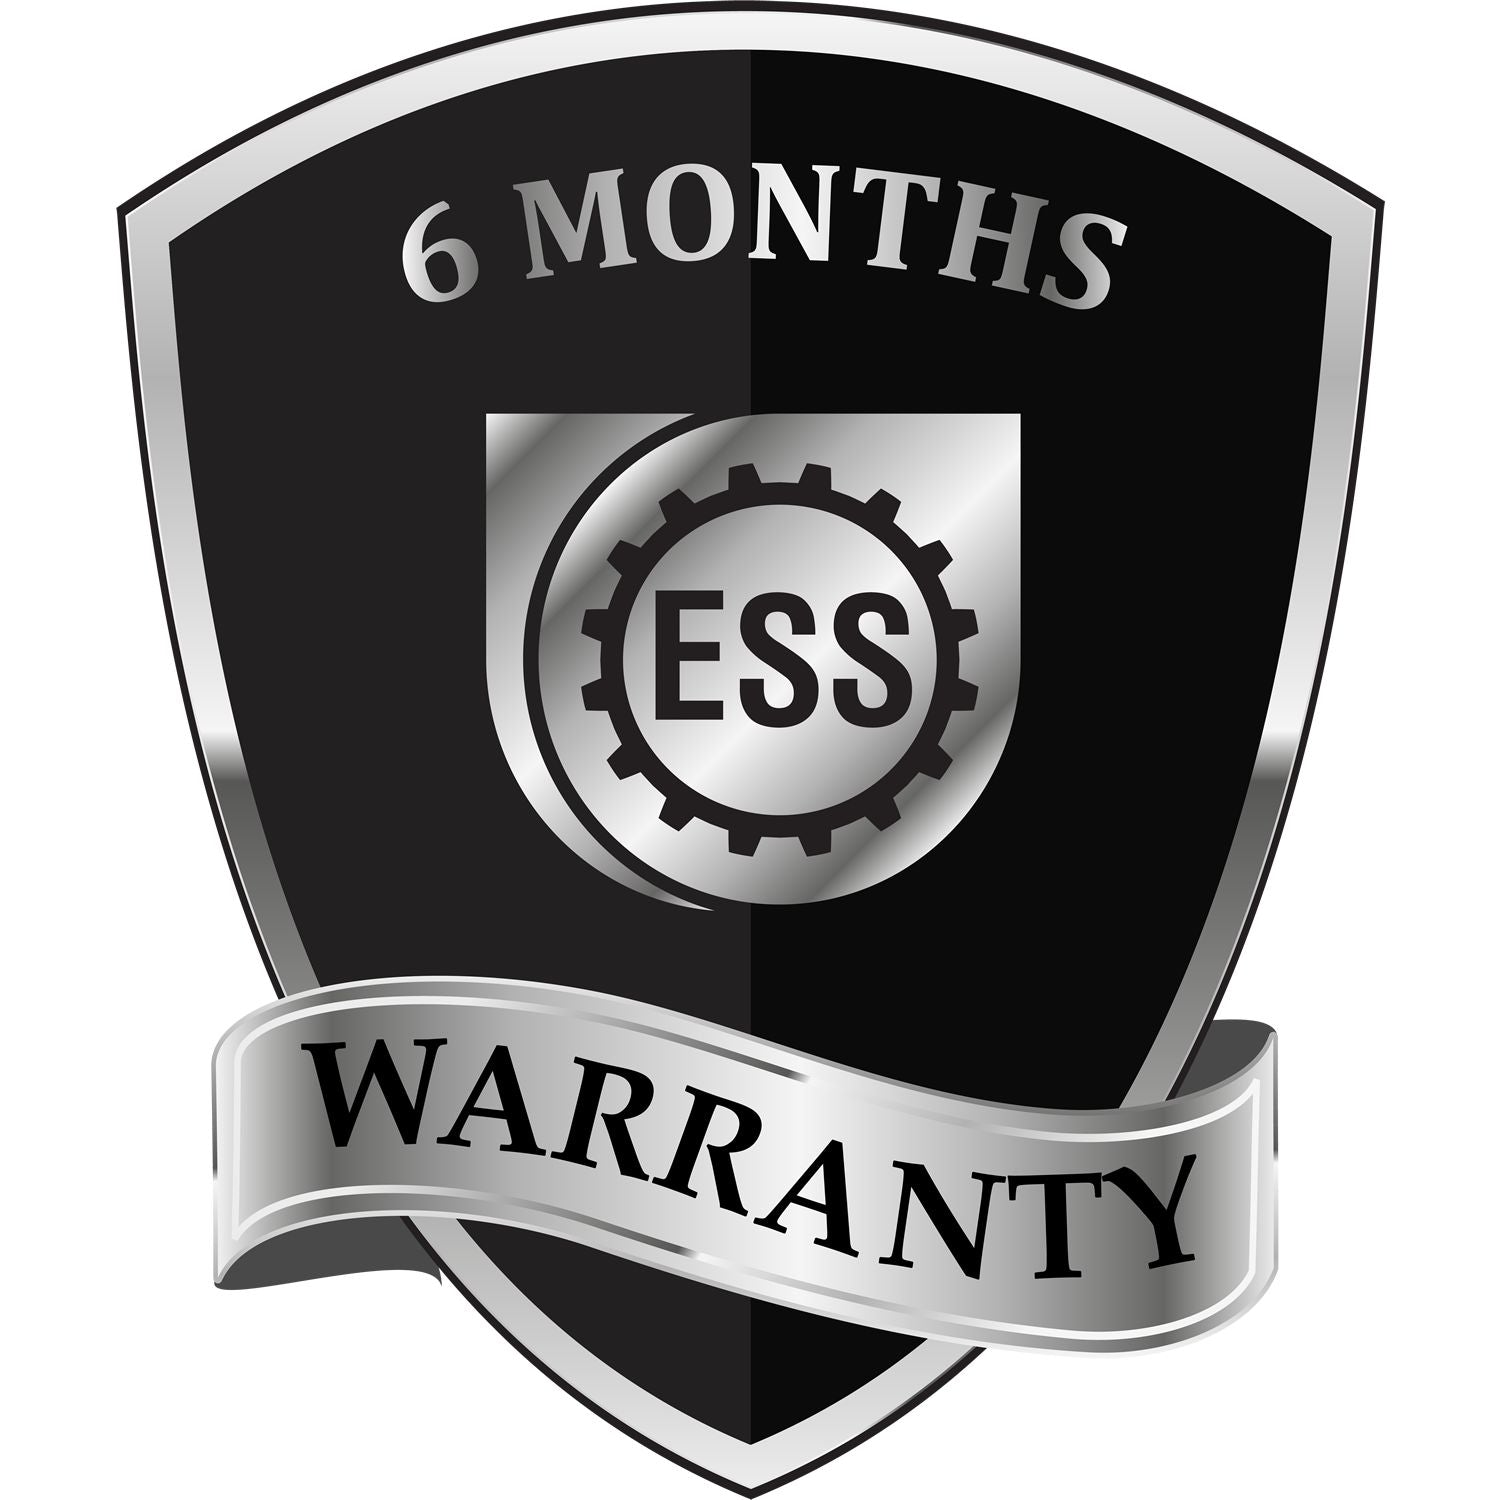 A badge or emblem showing a warranty icon for the Self-Inking Indiana PE Stamp